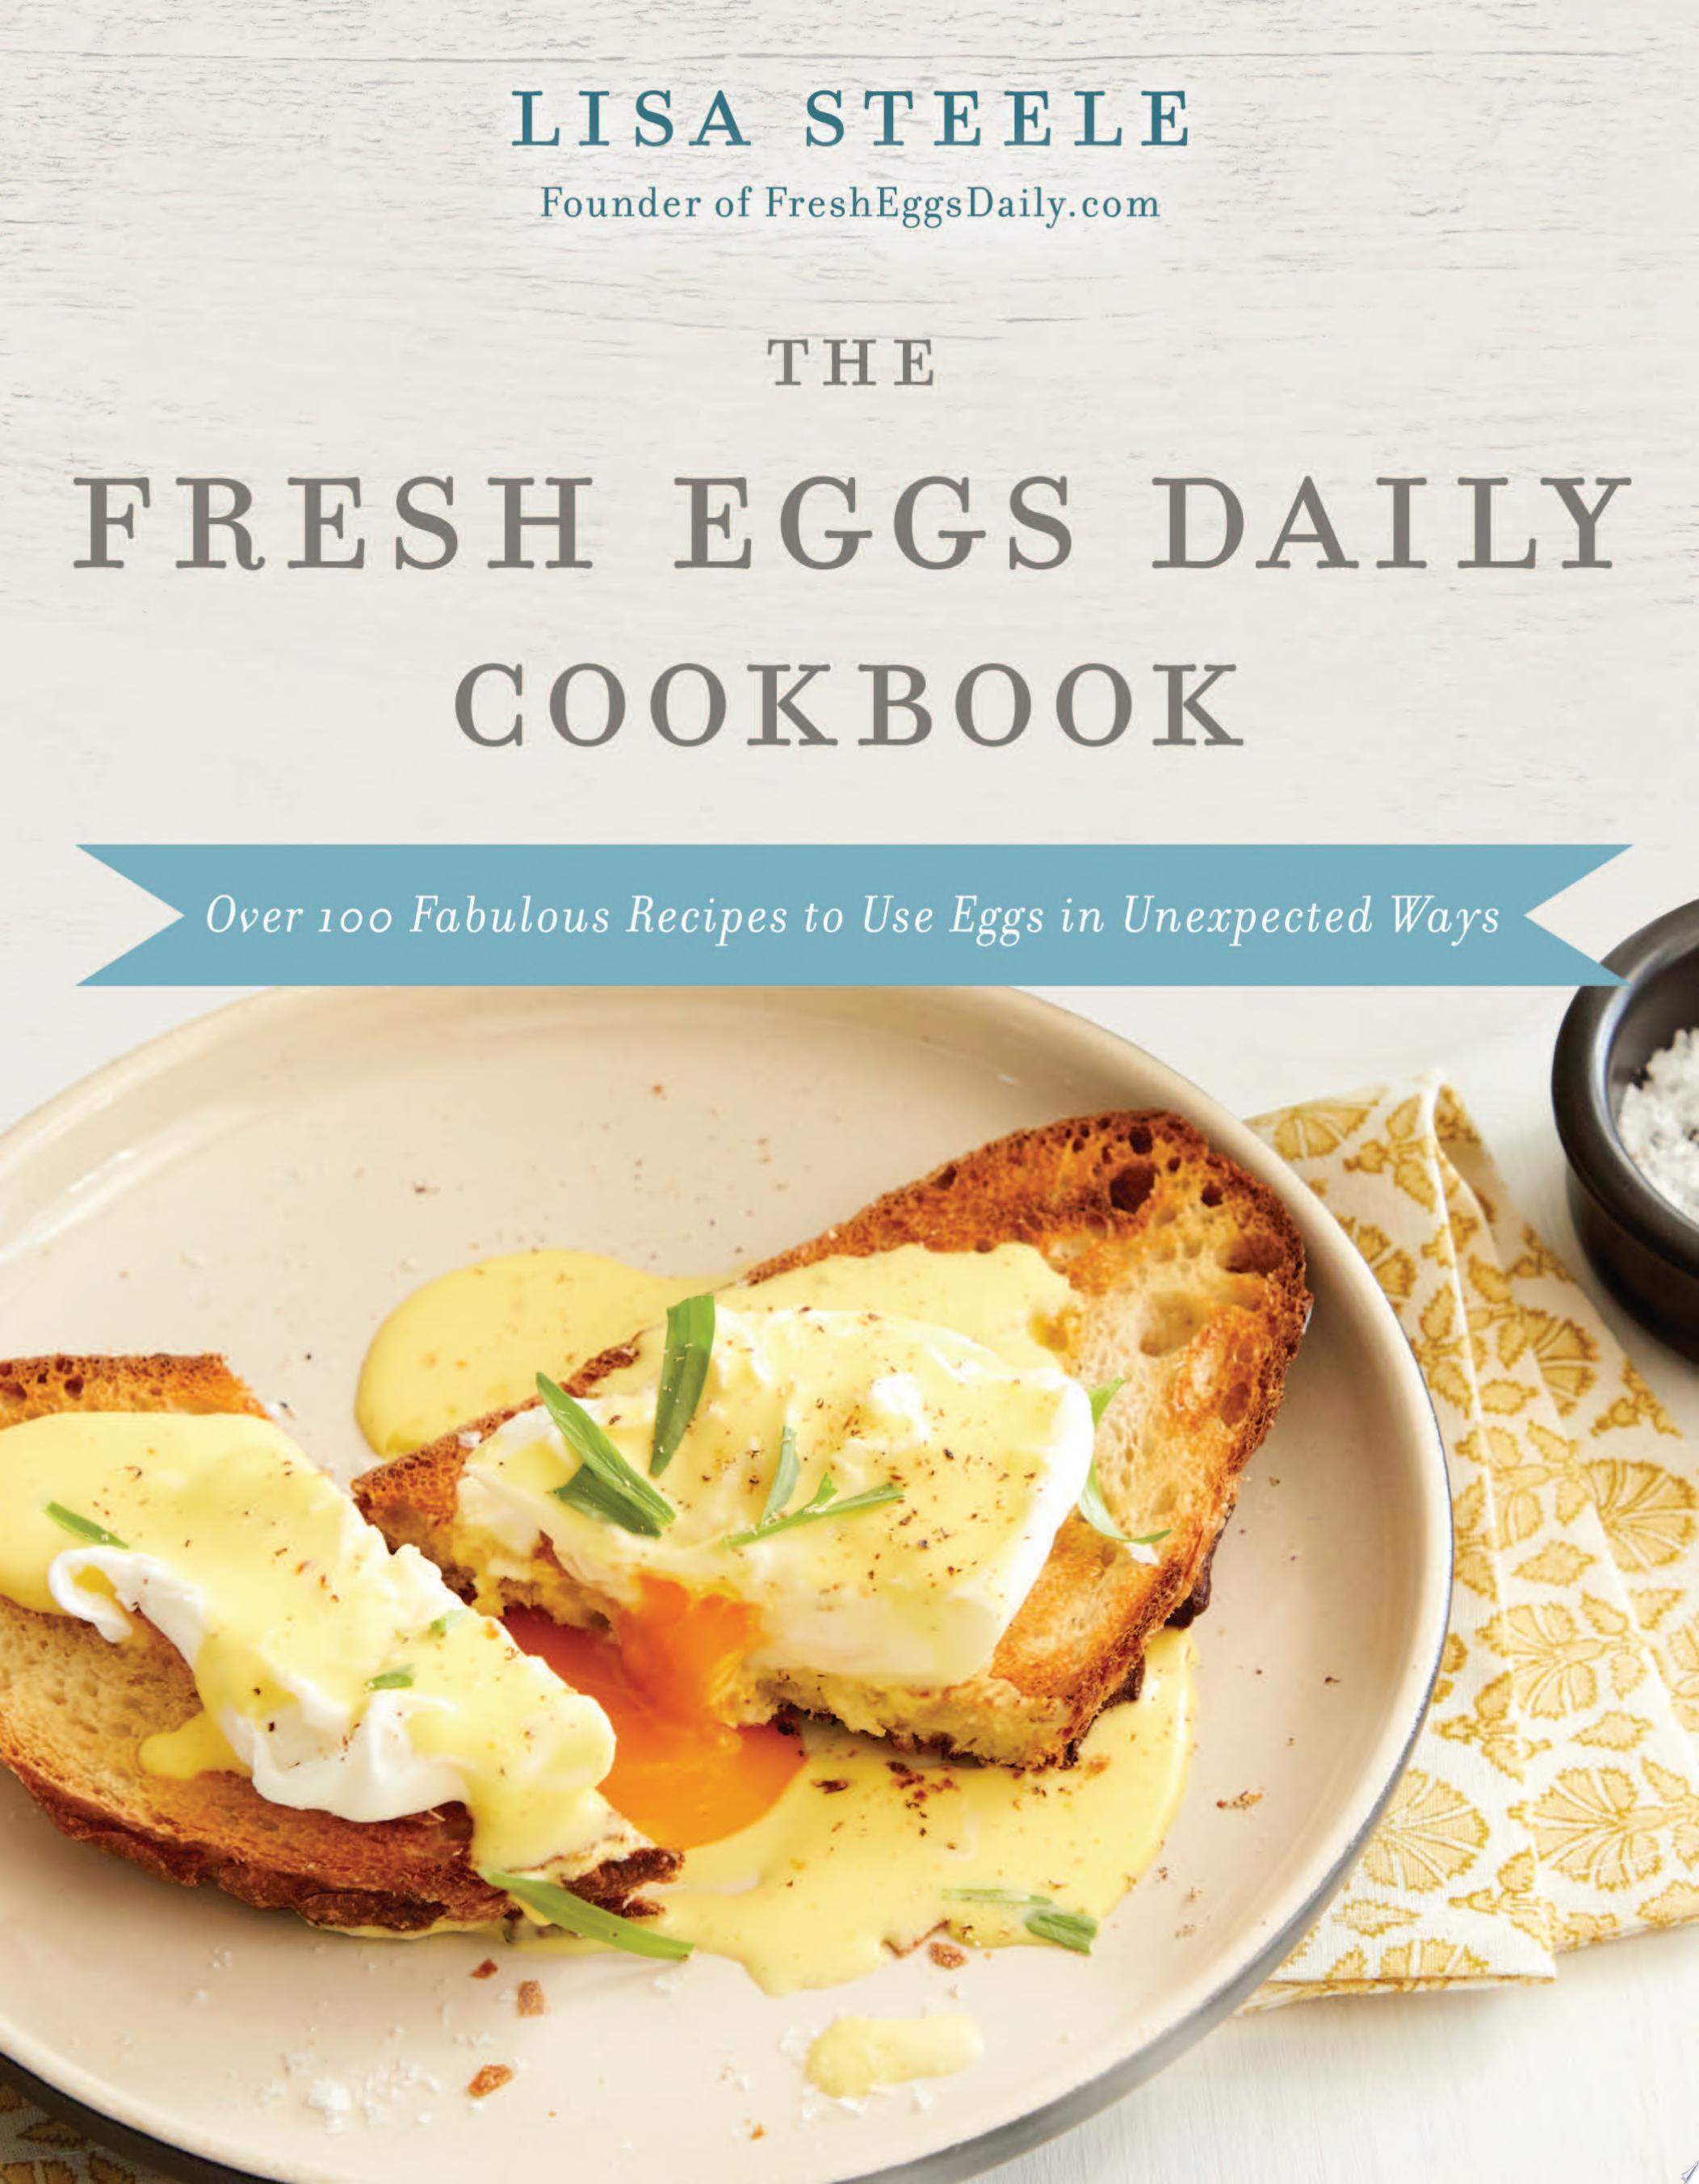 Image for "The Fresh Eggs Daily Cookbook"